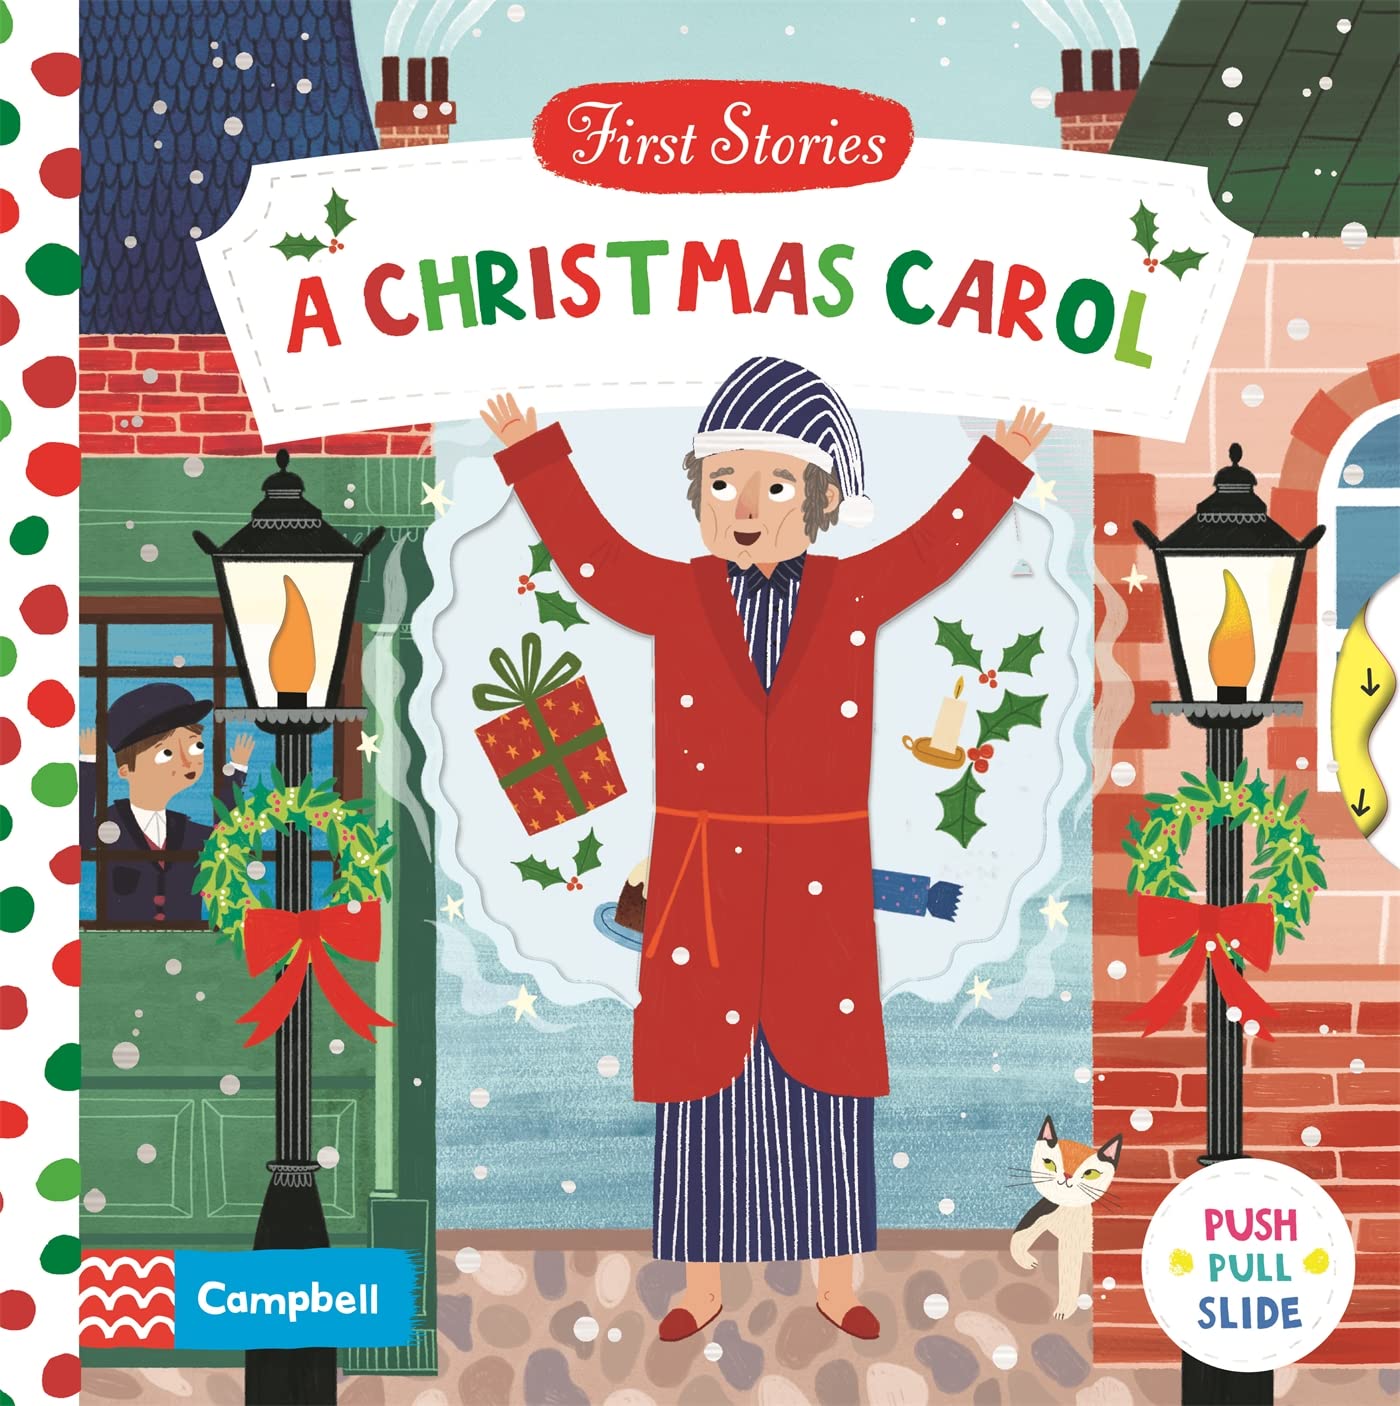 A Christmas Carol - First Stories